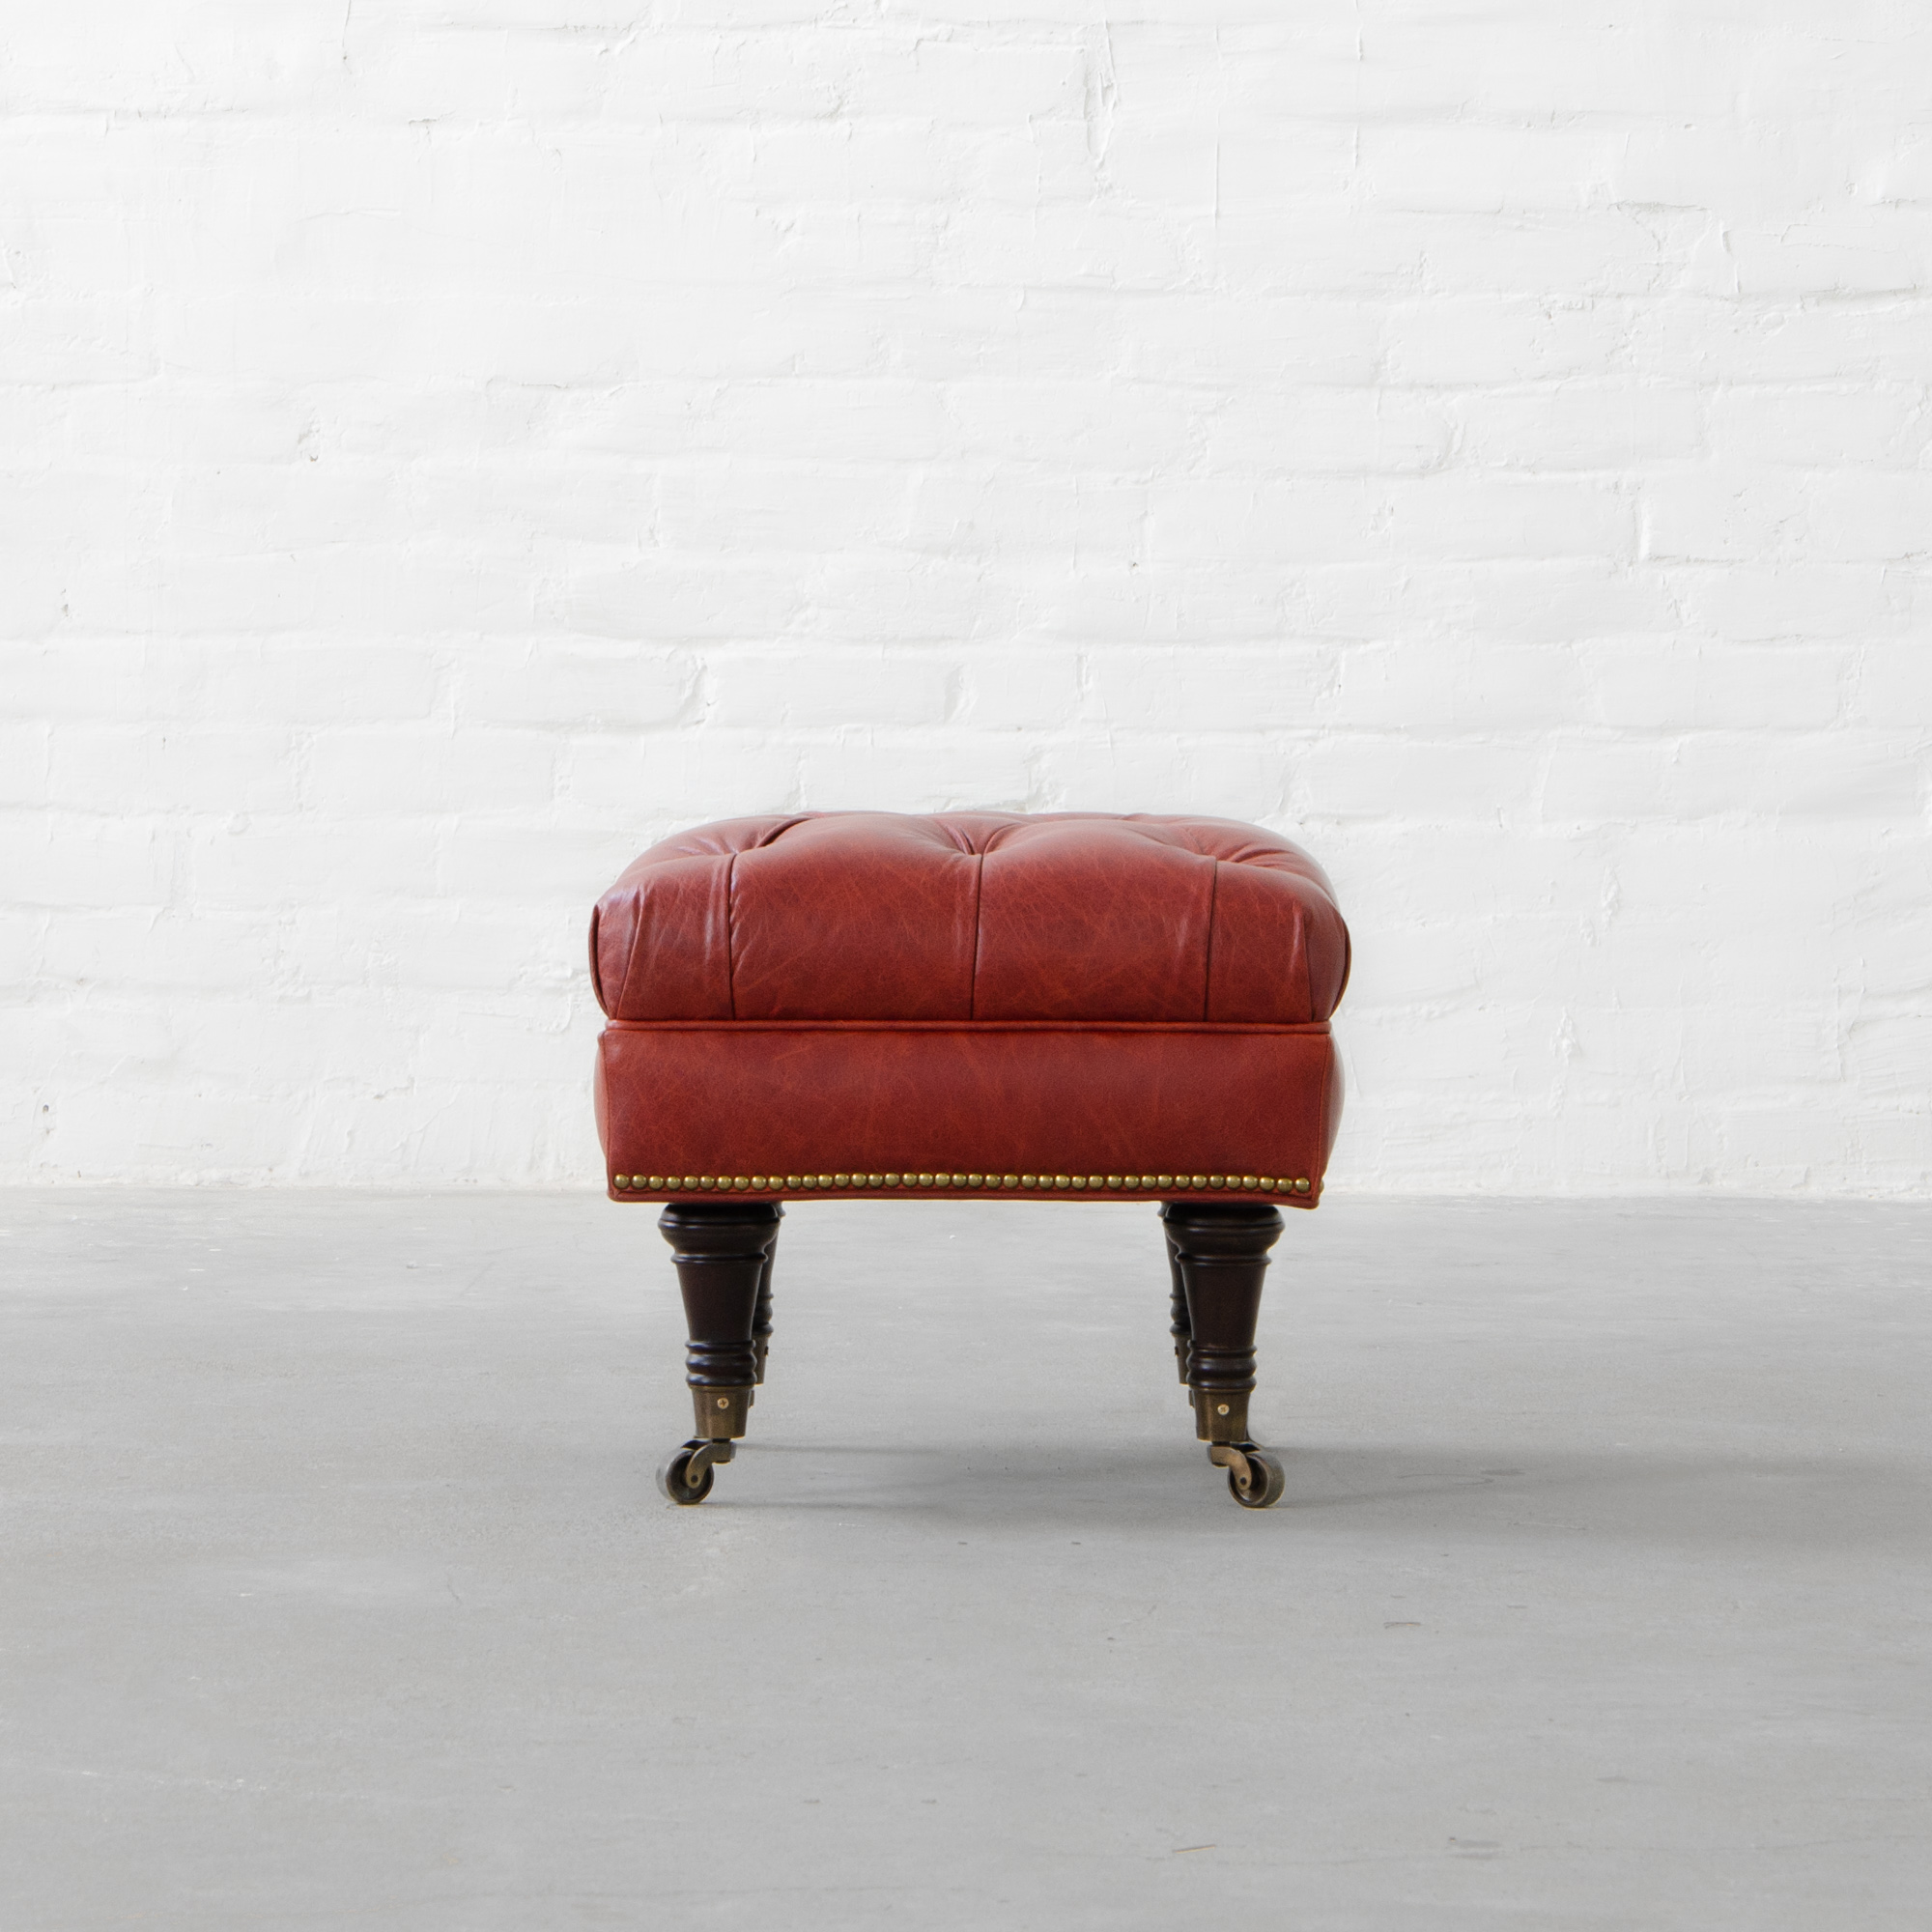 Ryan Upholstered Leather Ottoman, Red Leather Bench